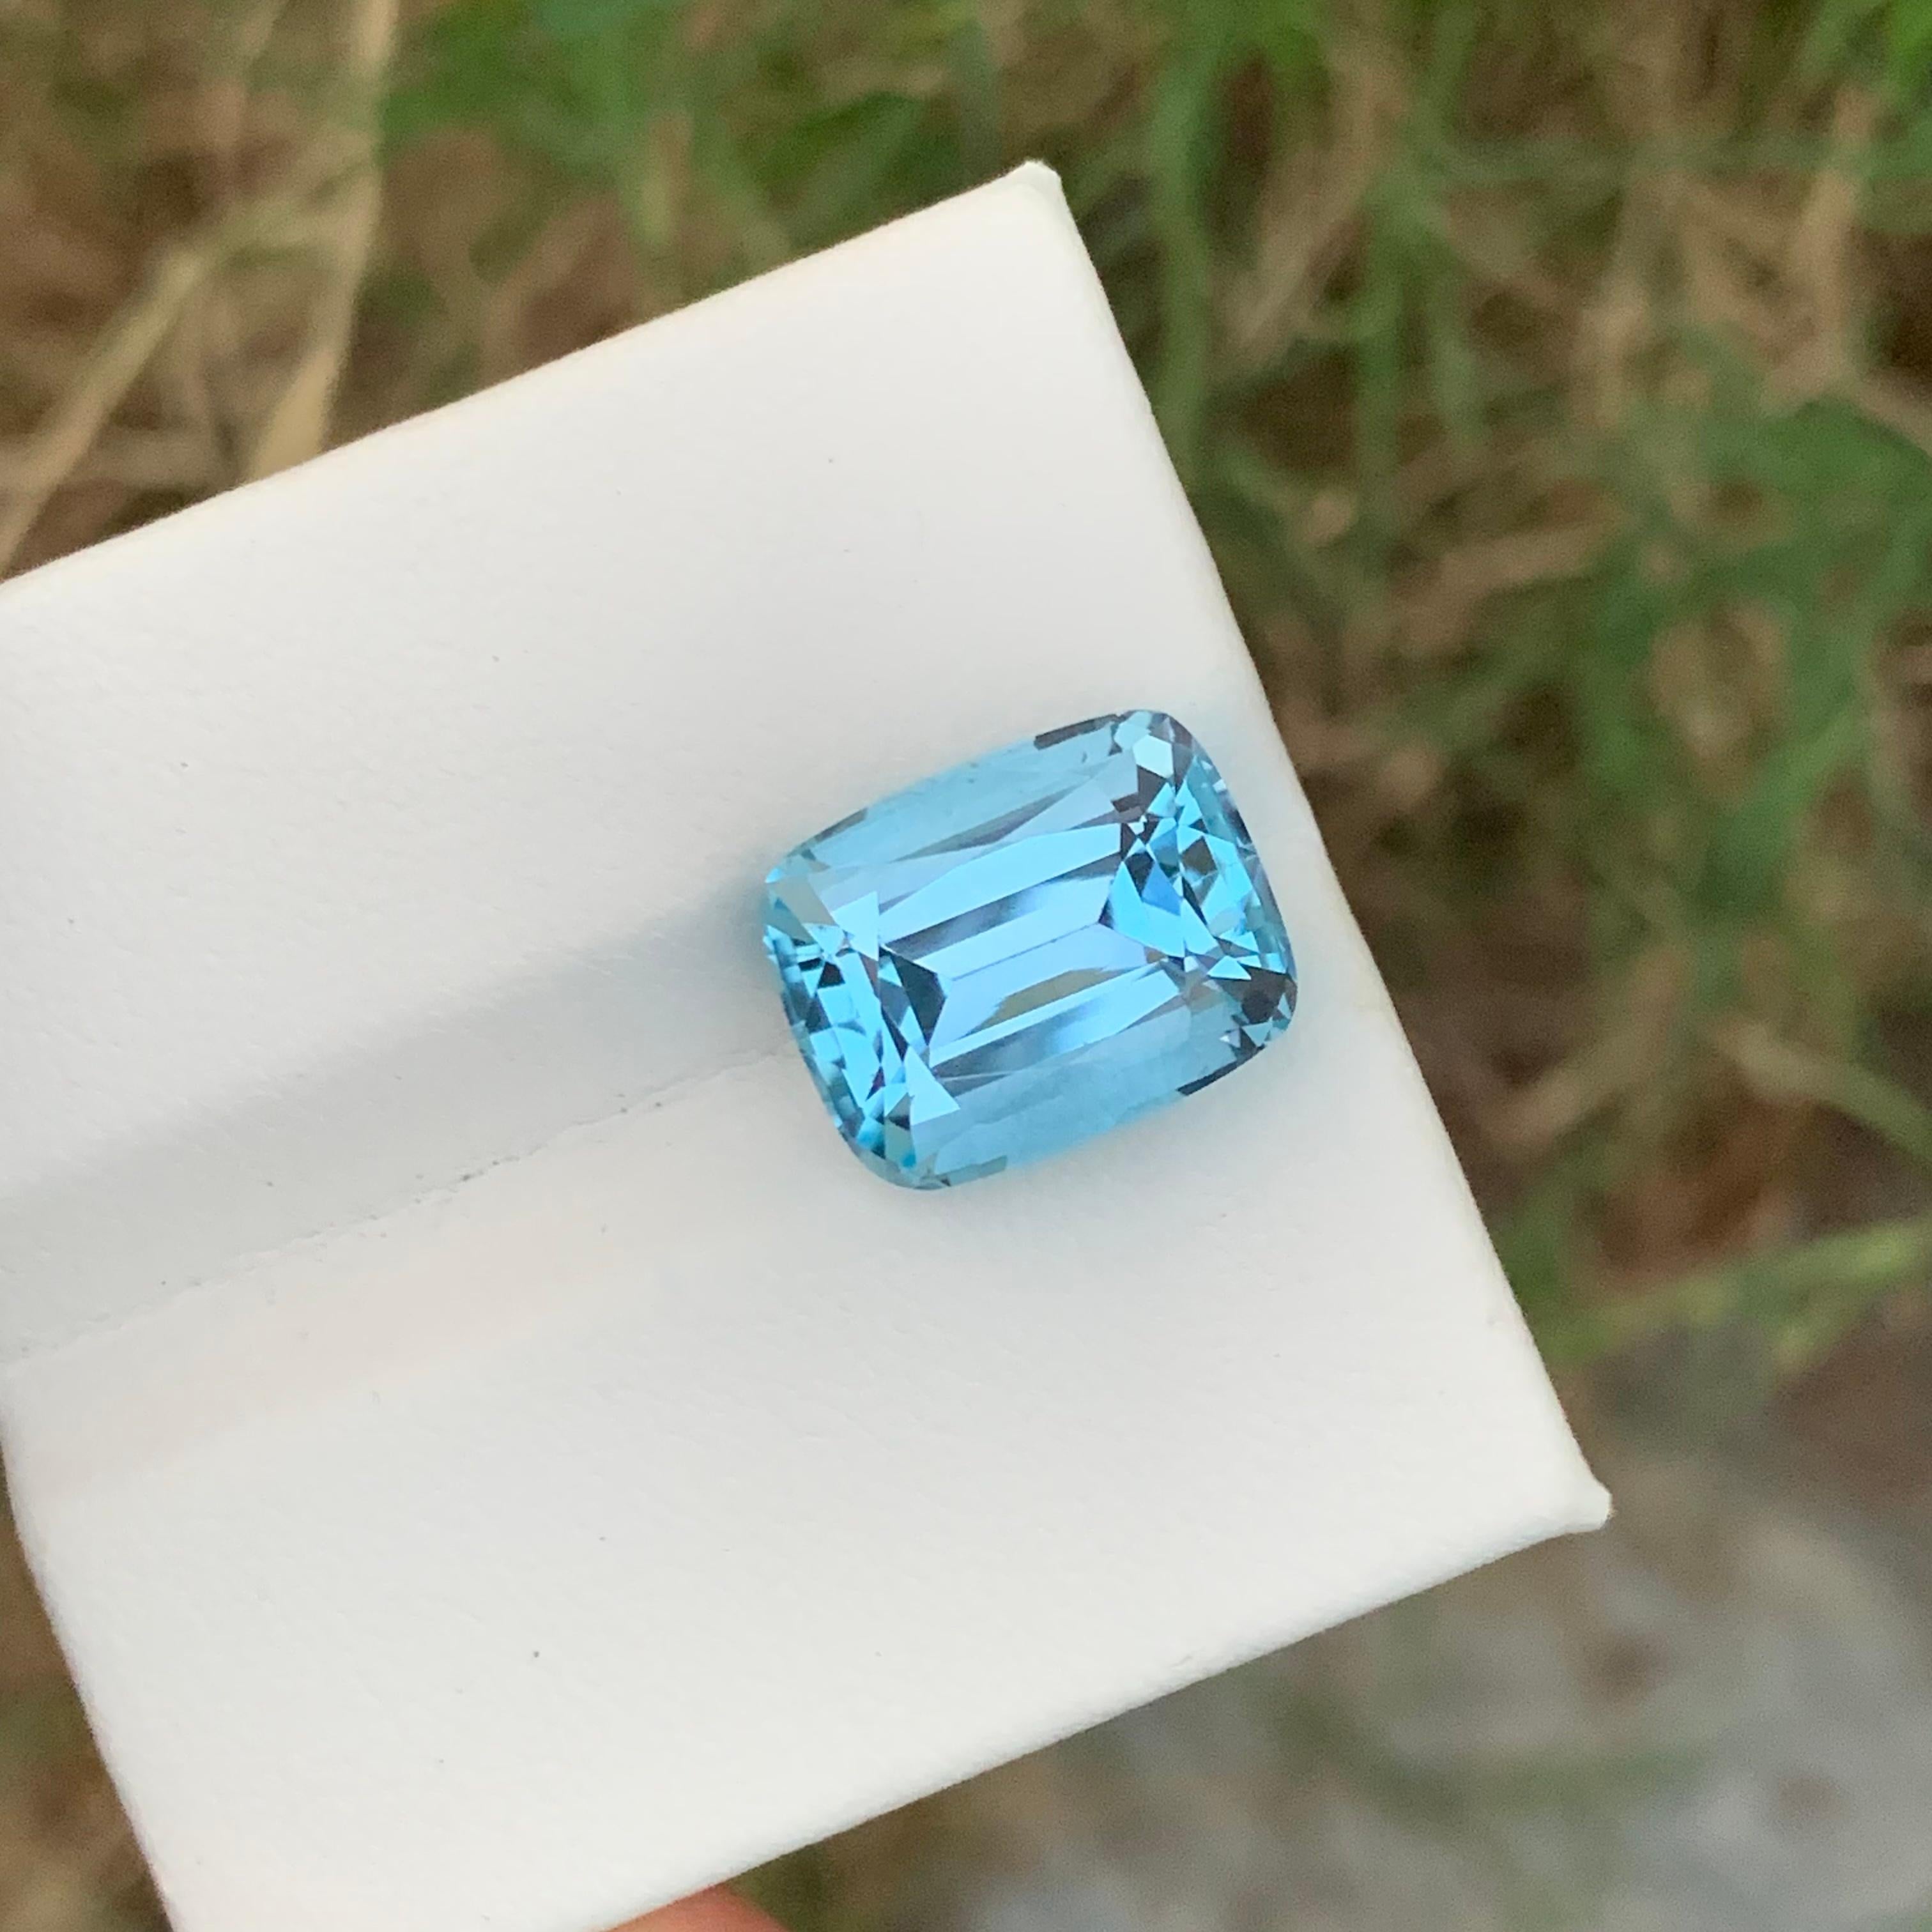 Gorgeous Clean Faceted Sky Blue Topaz 12 Carat From Brazil Mine Cushion Shape  For Sale 2